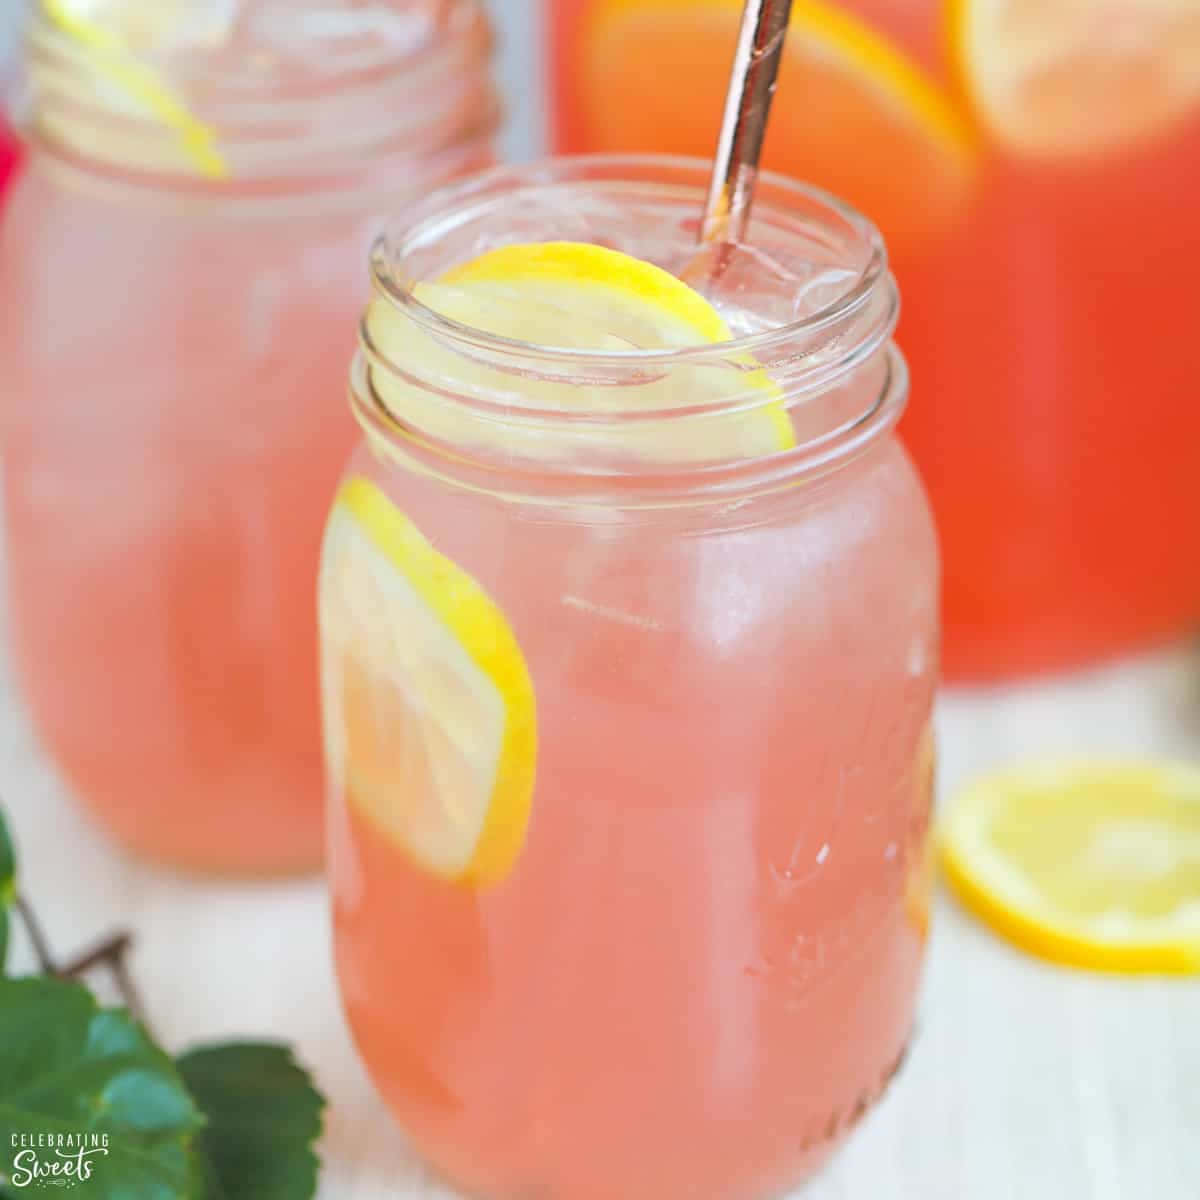 A Pitcher Of Pink Lemonade With A Straw And Lemons